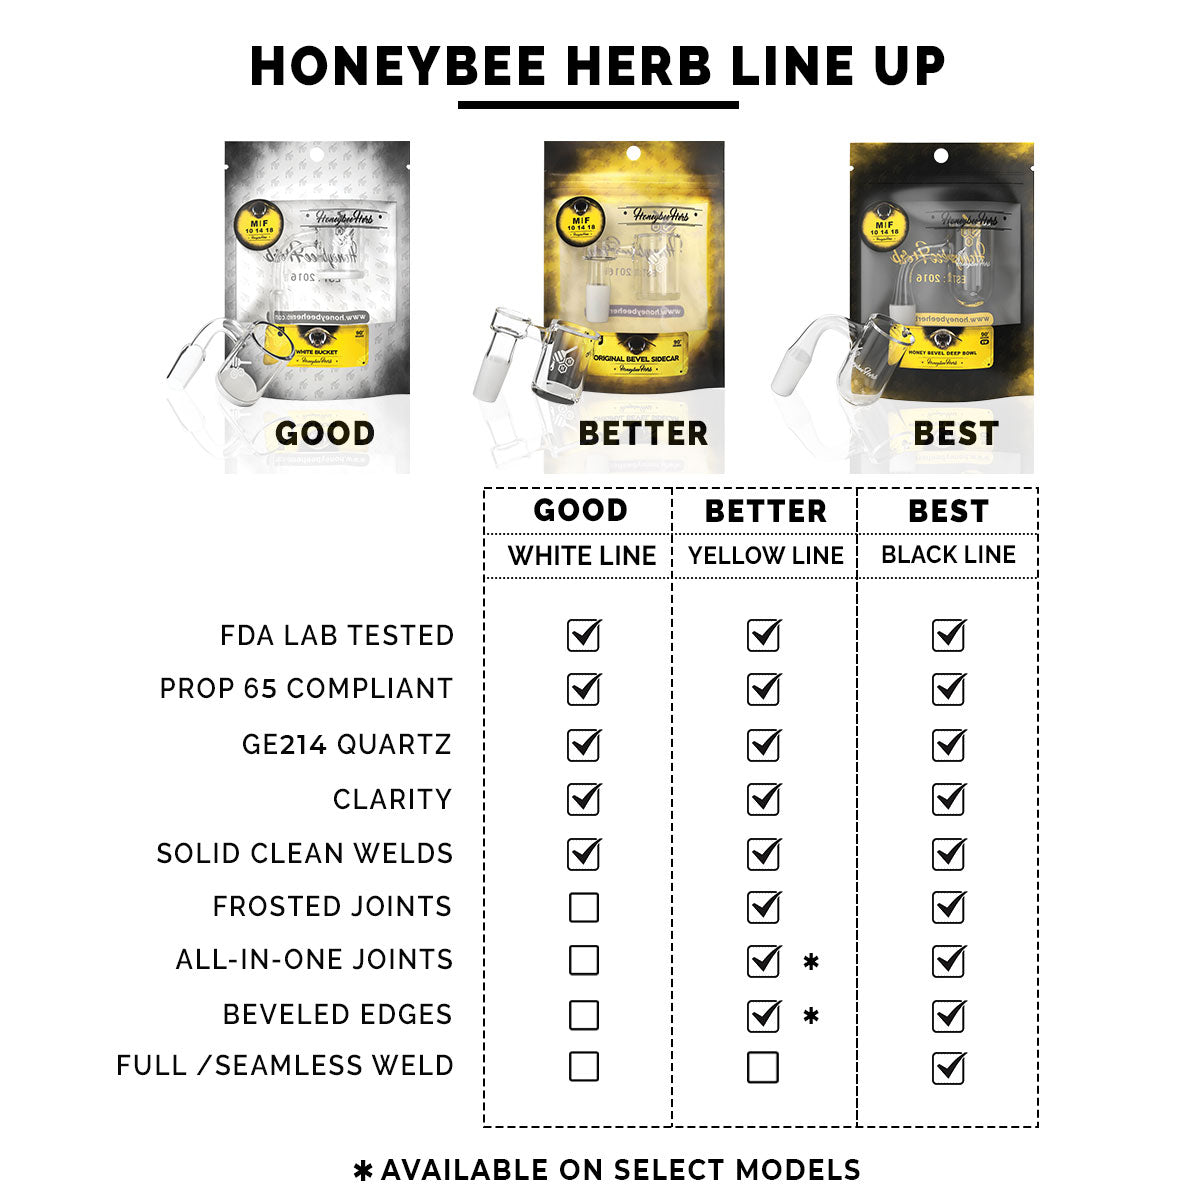 Honeybee Herb Halo Quartz Banger comparison chart showing quality tiers from good to best.